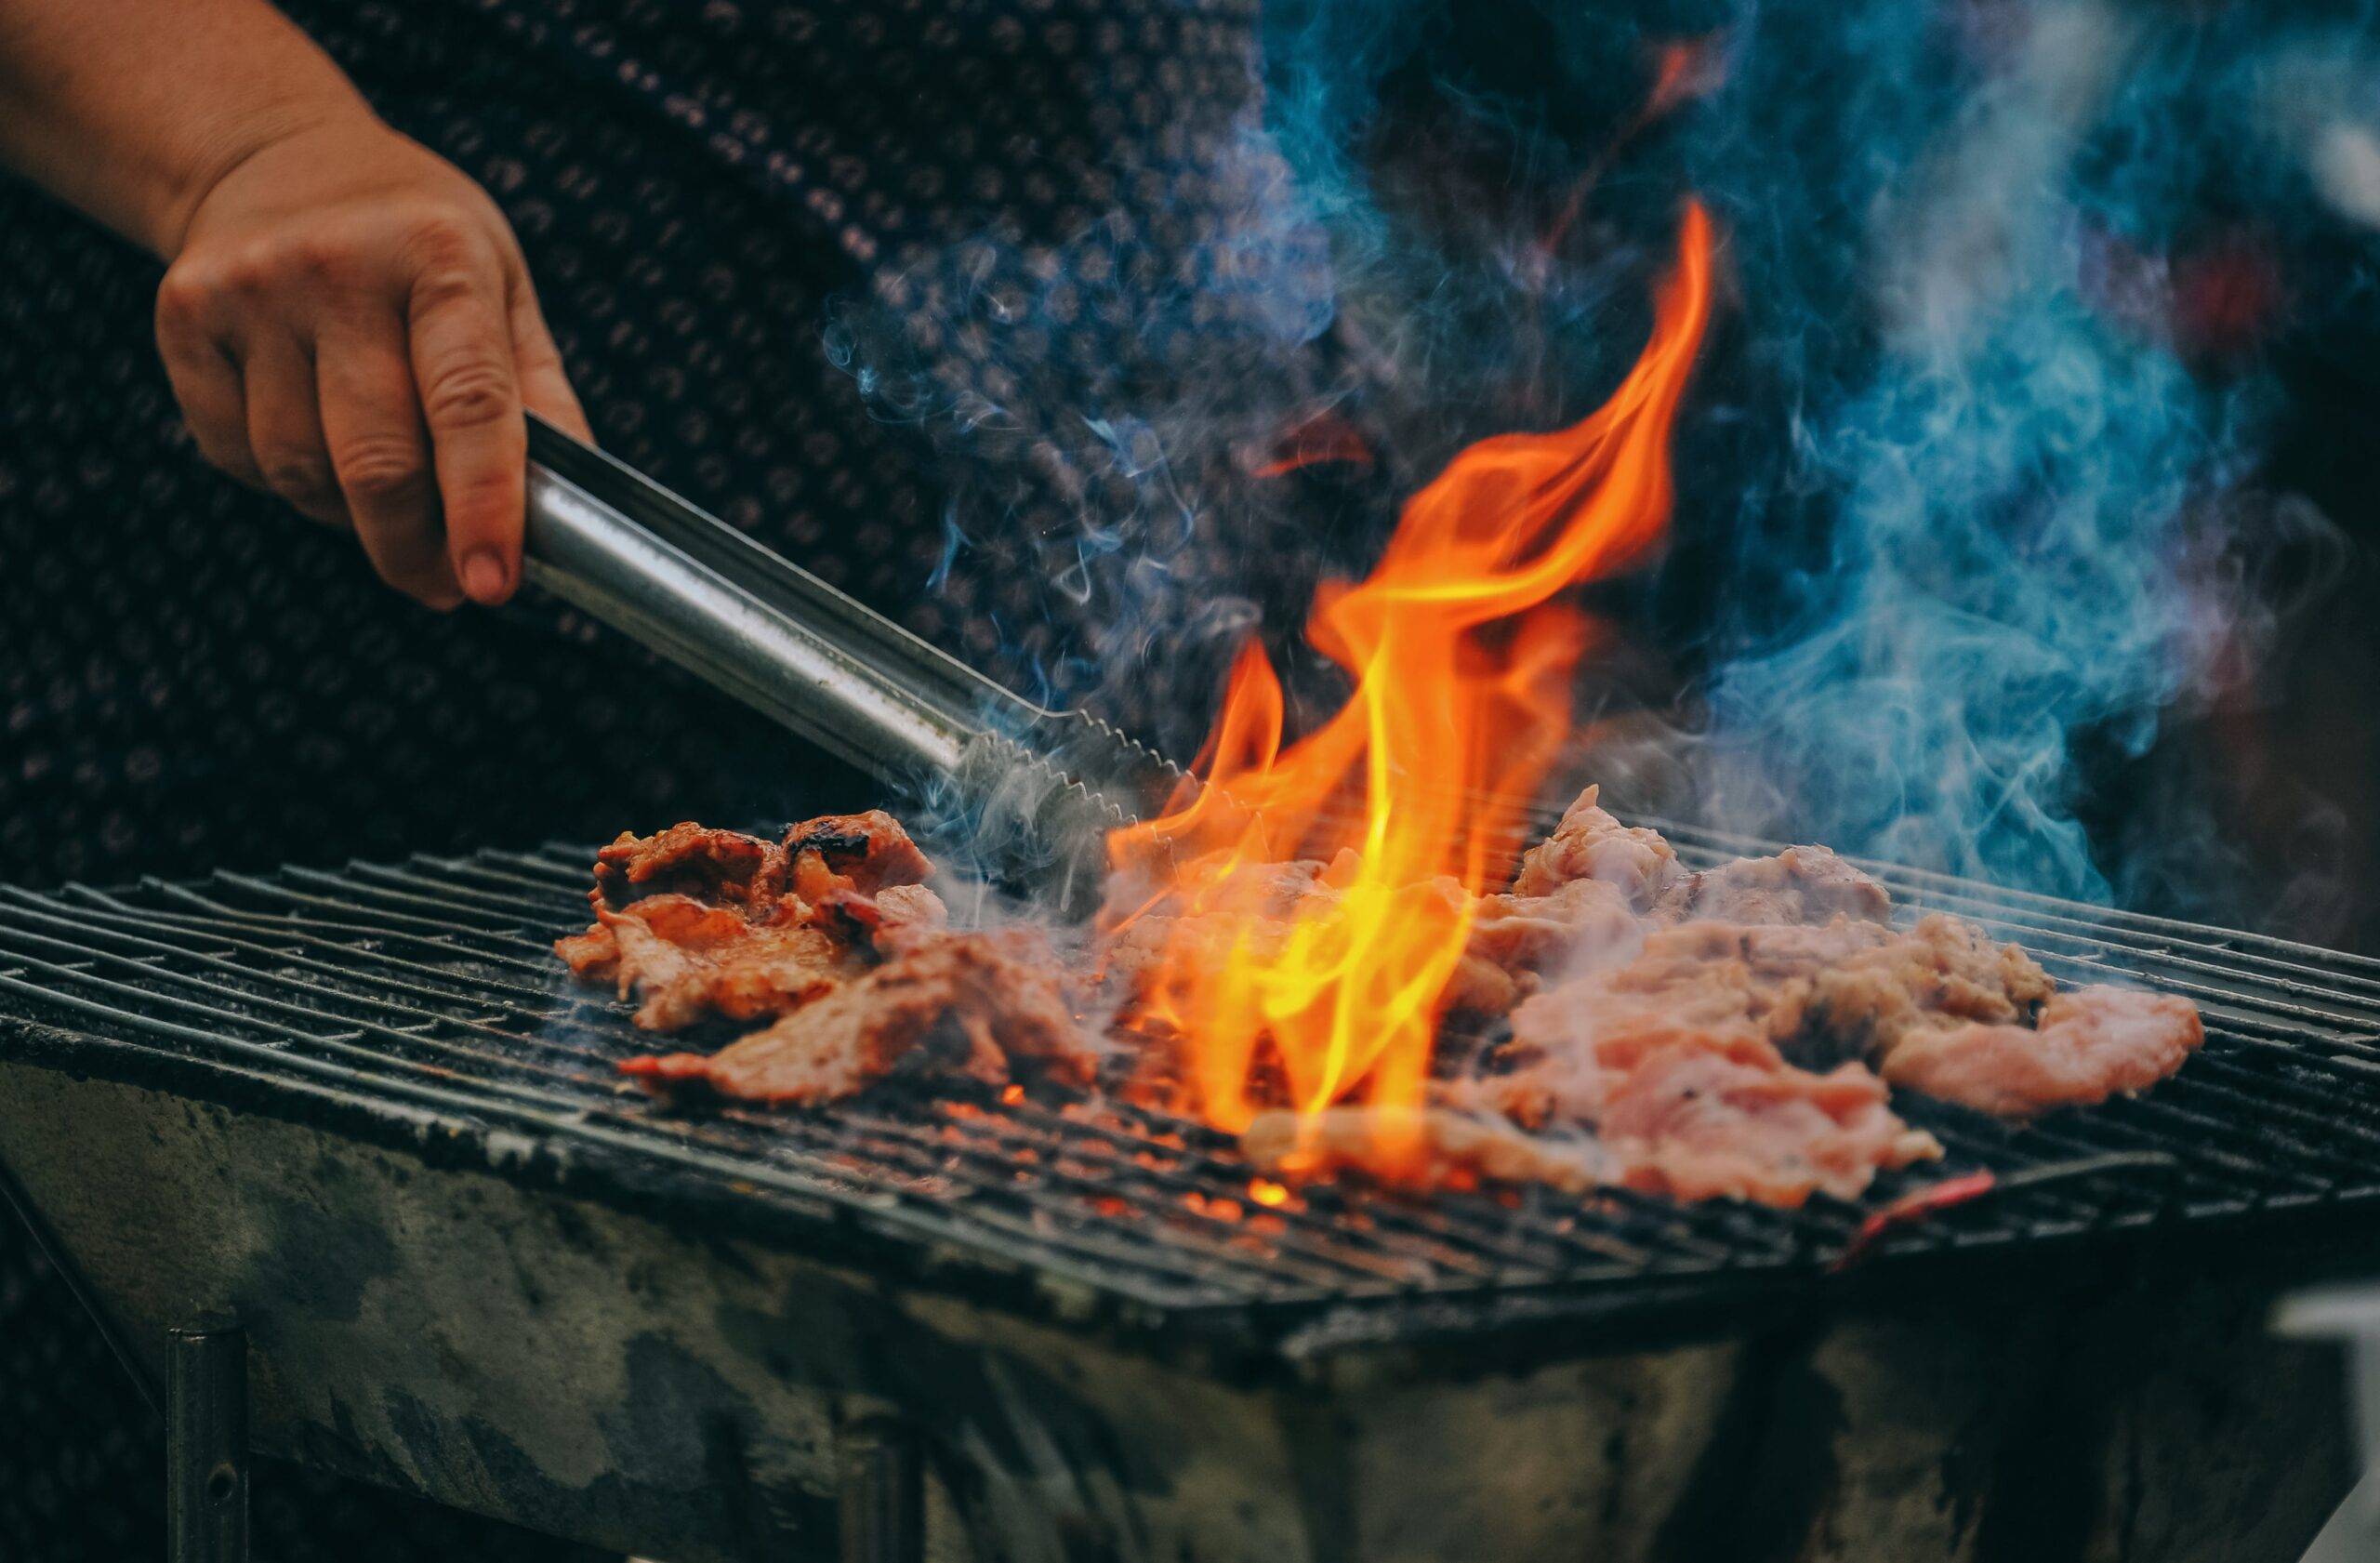 What Are The Best High-Heat Grilling Techniques